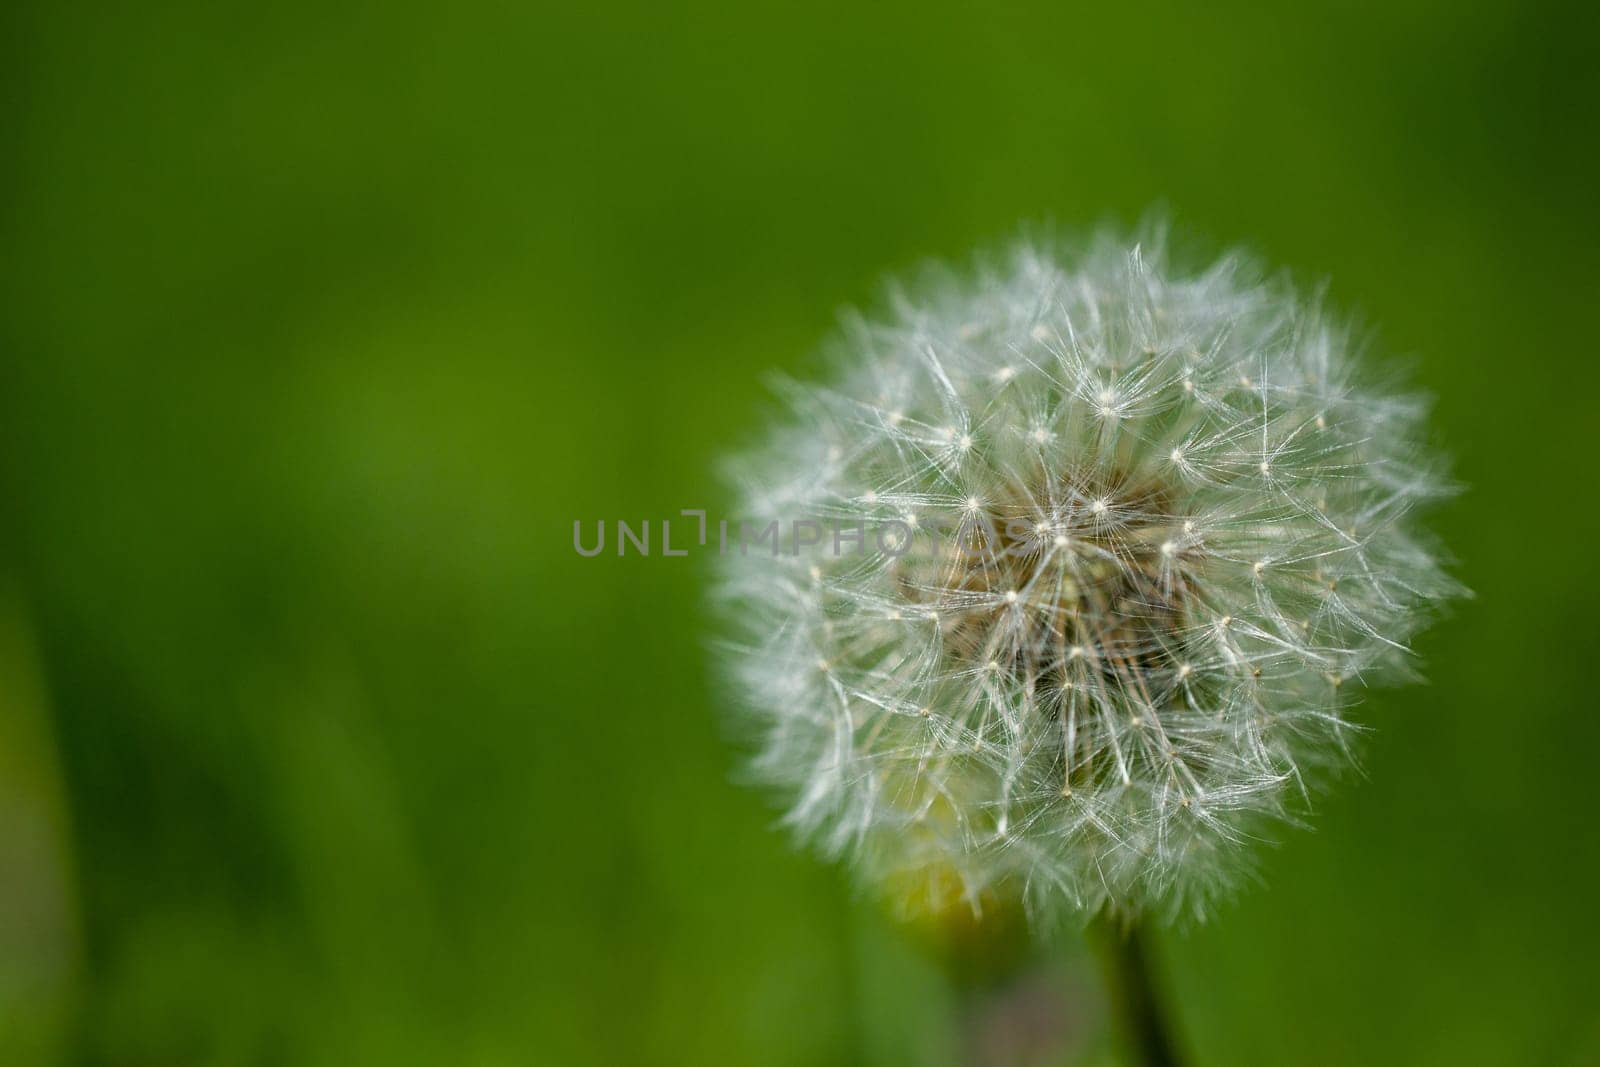 White fluffy dandelions, natural green blurred spring background, selective focus. High quality photo